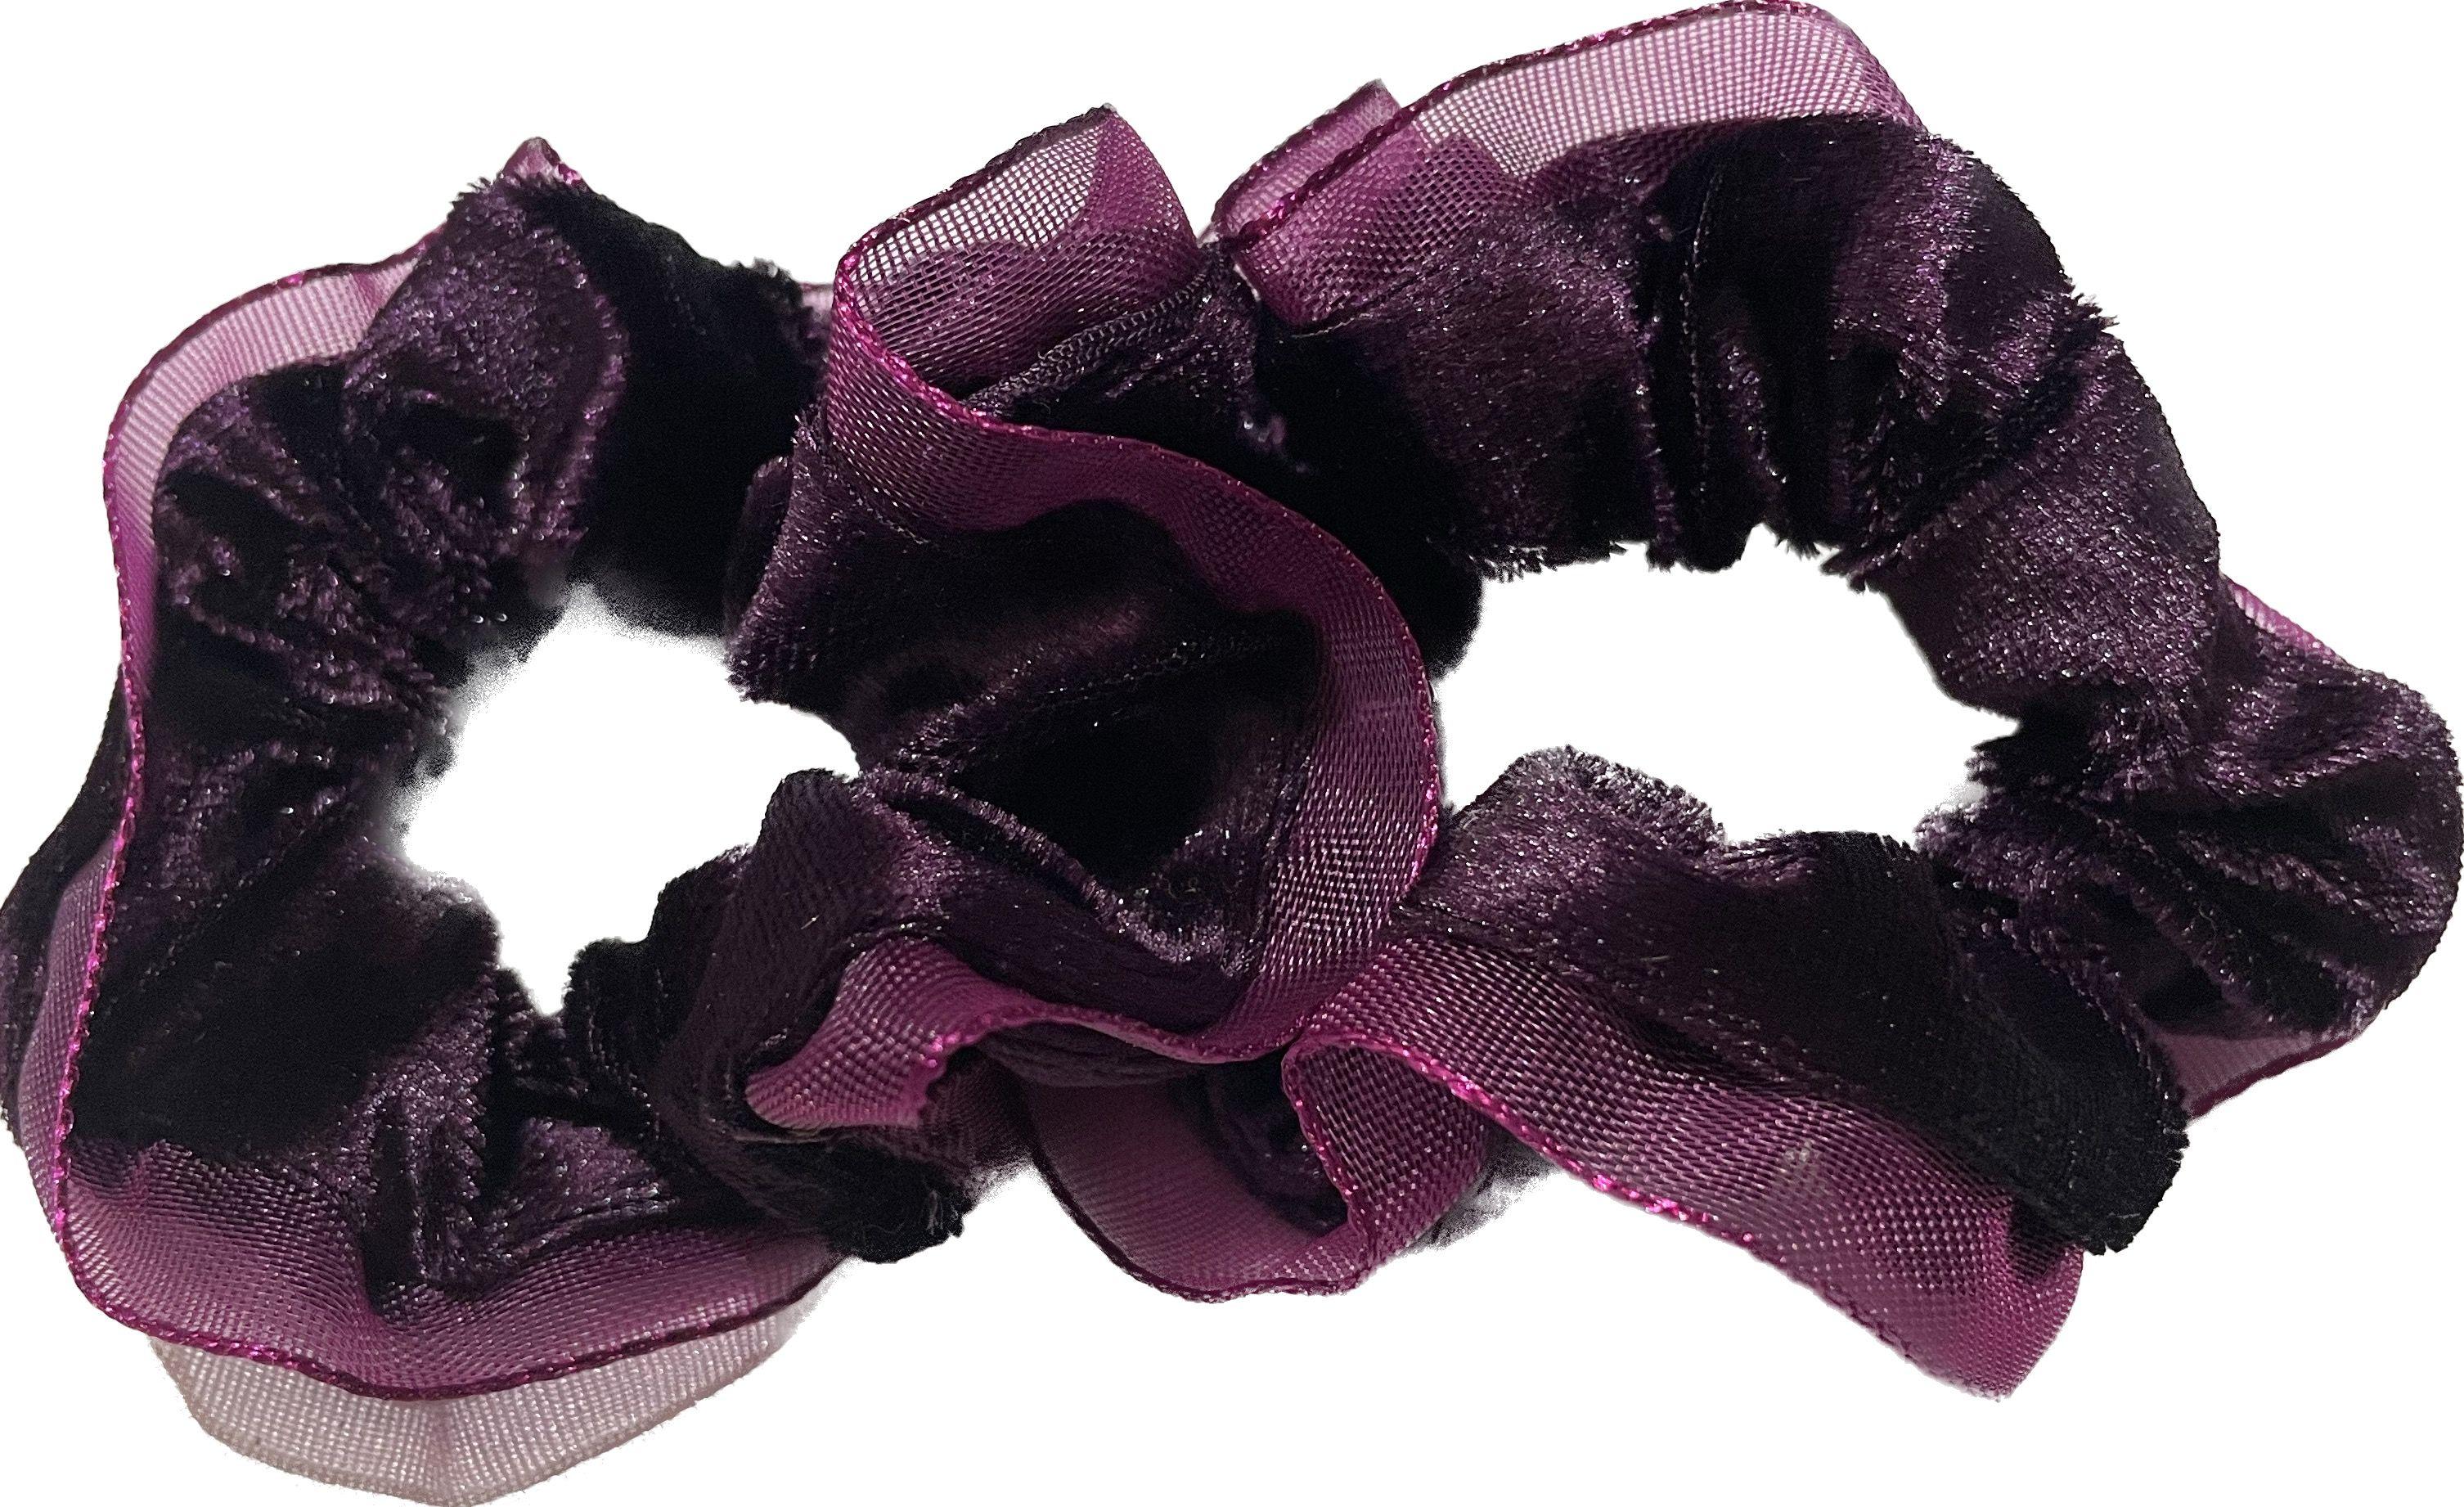 Velor hair scrunchie BLING 2 pcs. - with lace, plum